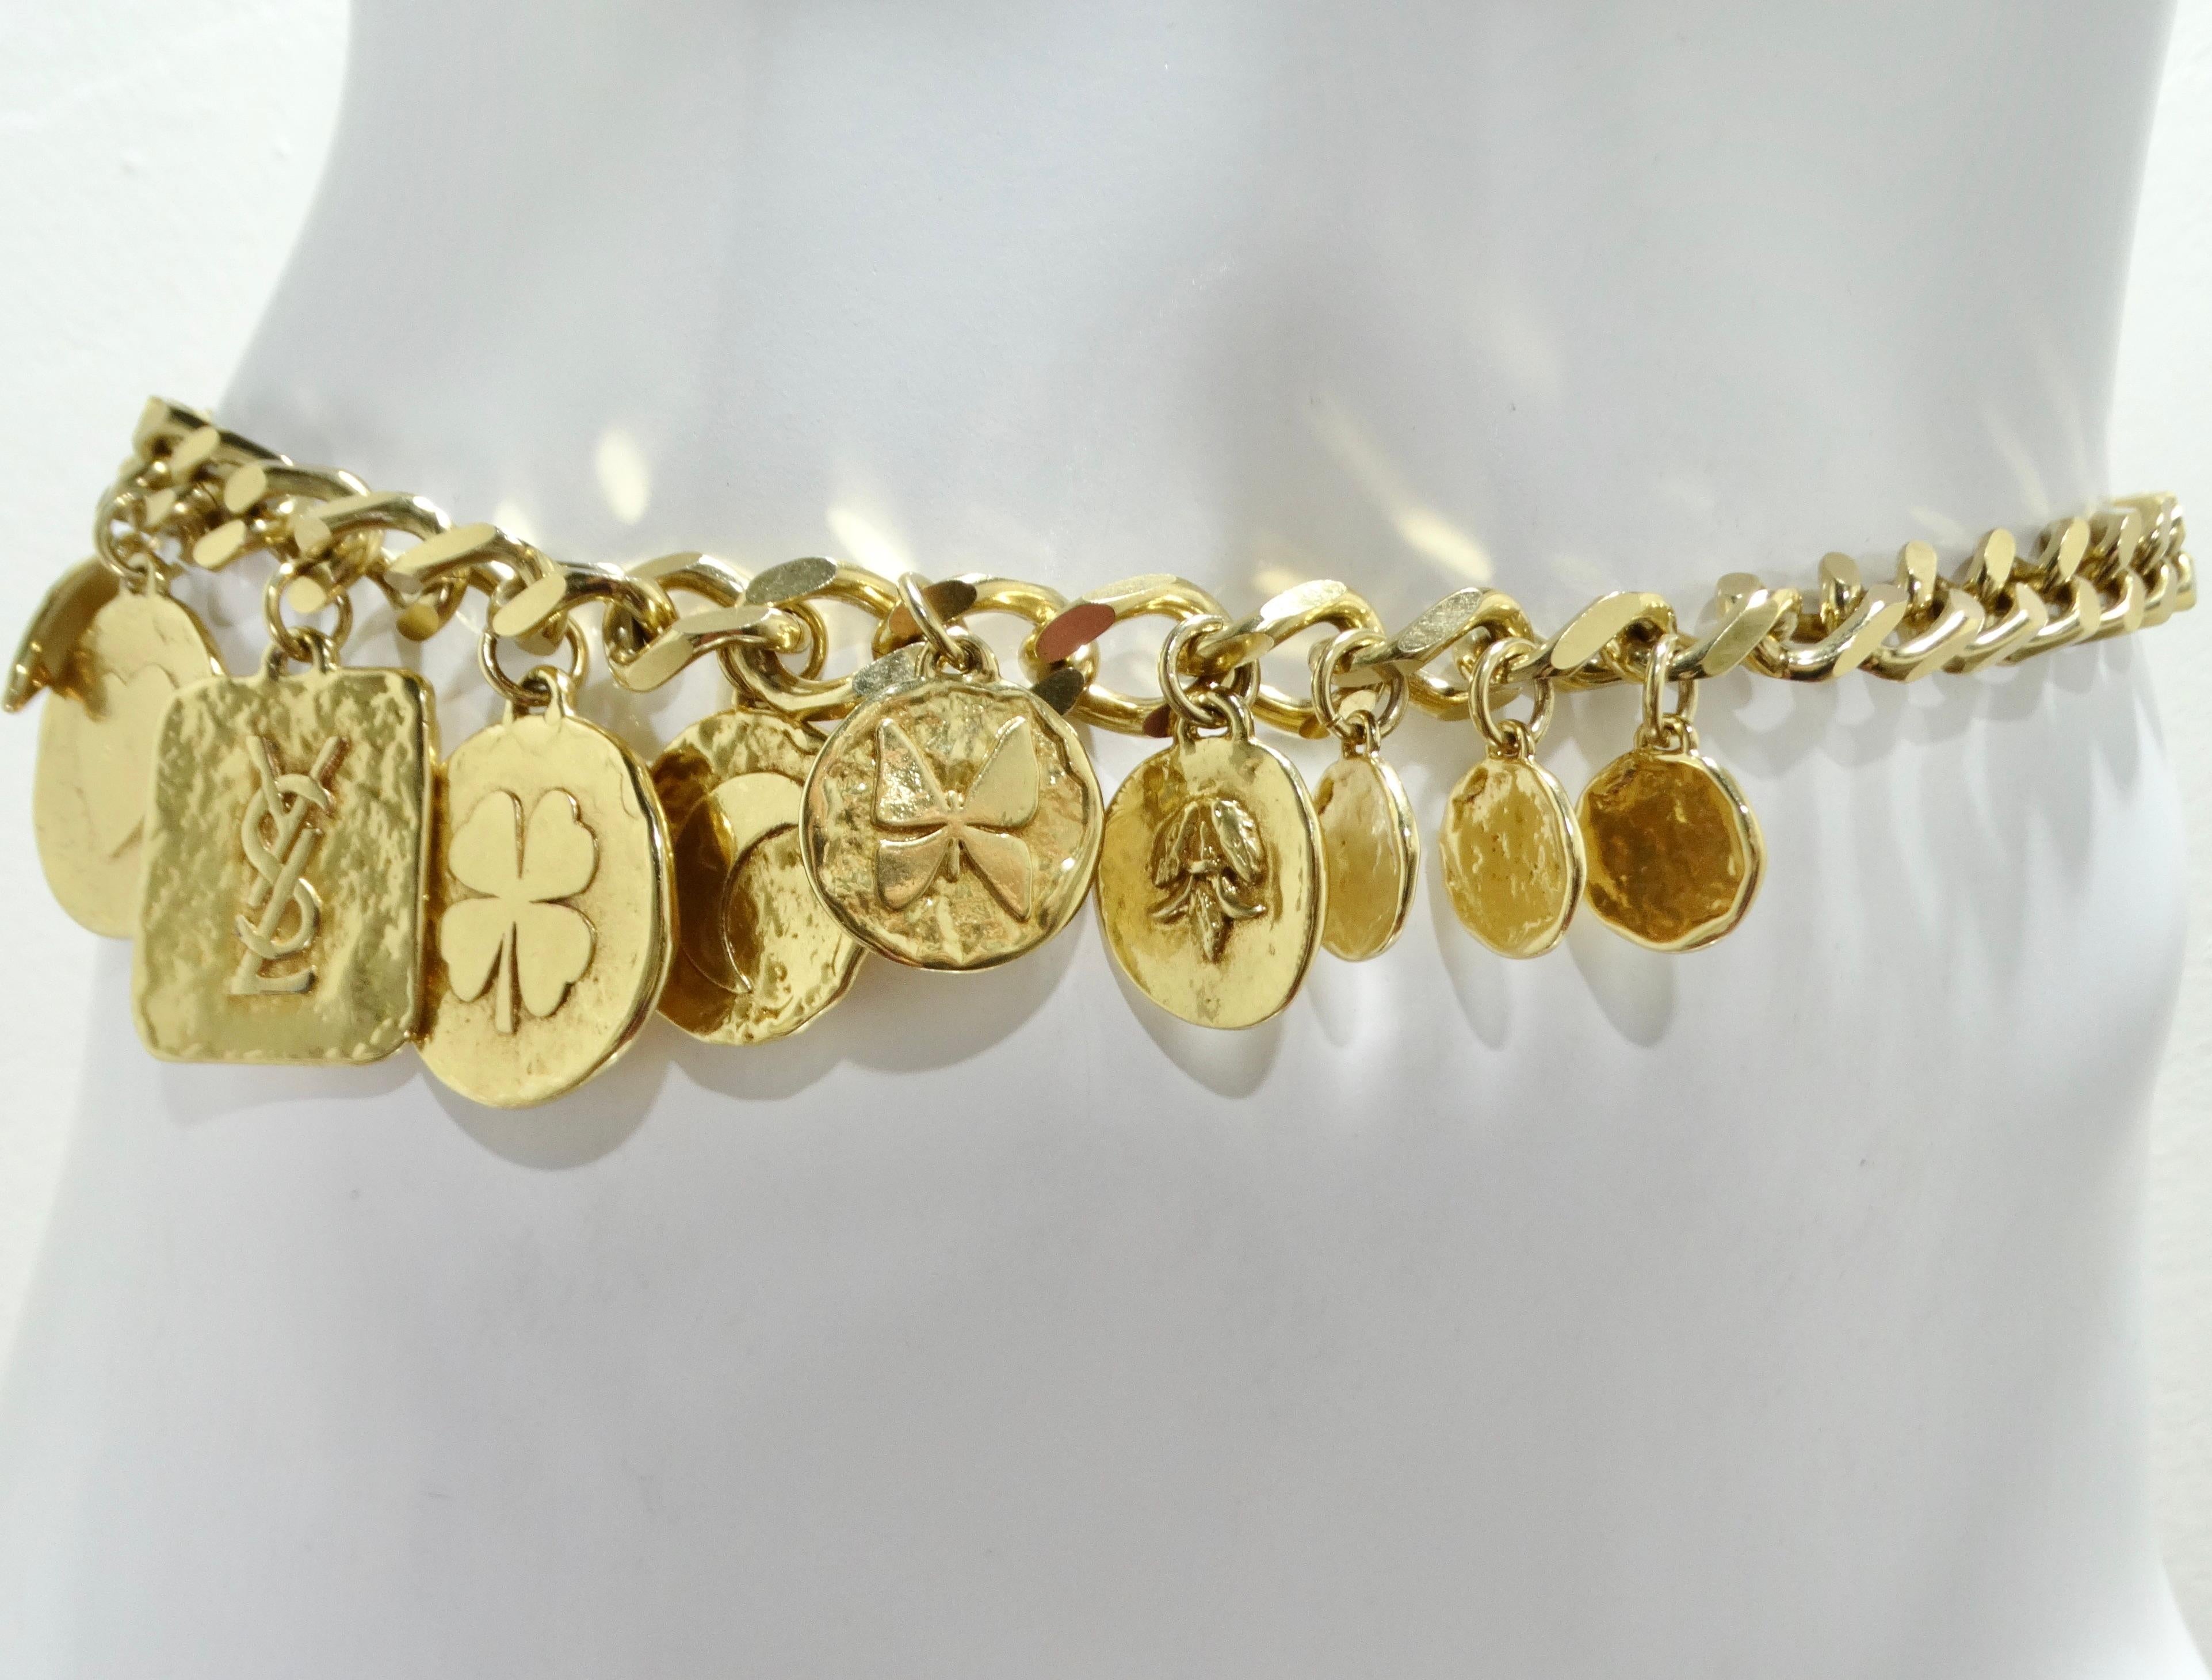 Yves Saint Laurent 1990s Gold Tone Charm Chain Belt In Excellent Condition For Sale In Scottsdale, AZ